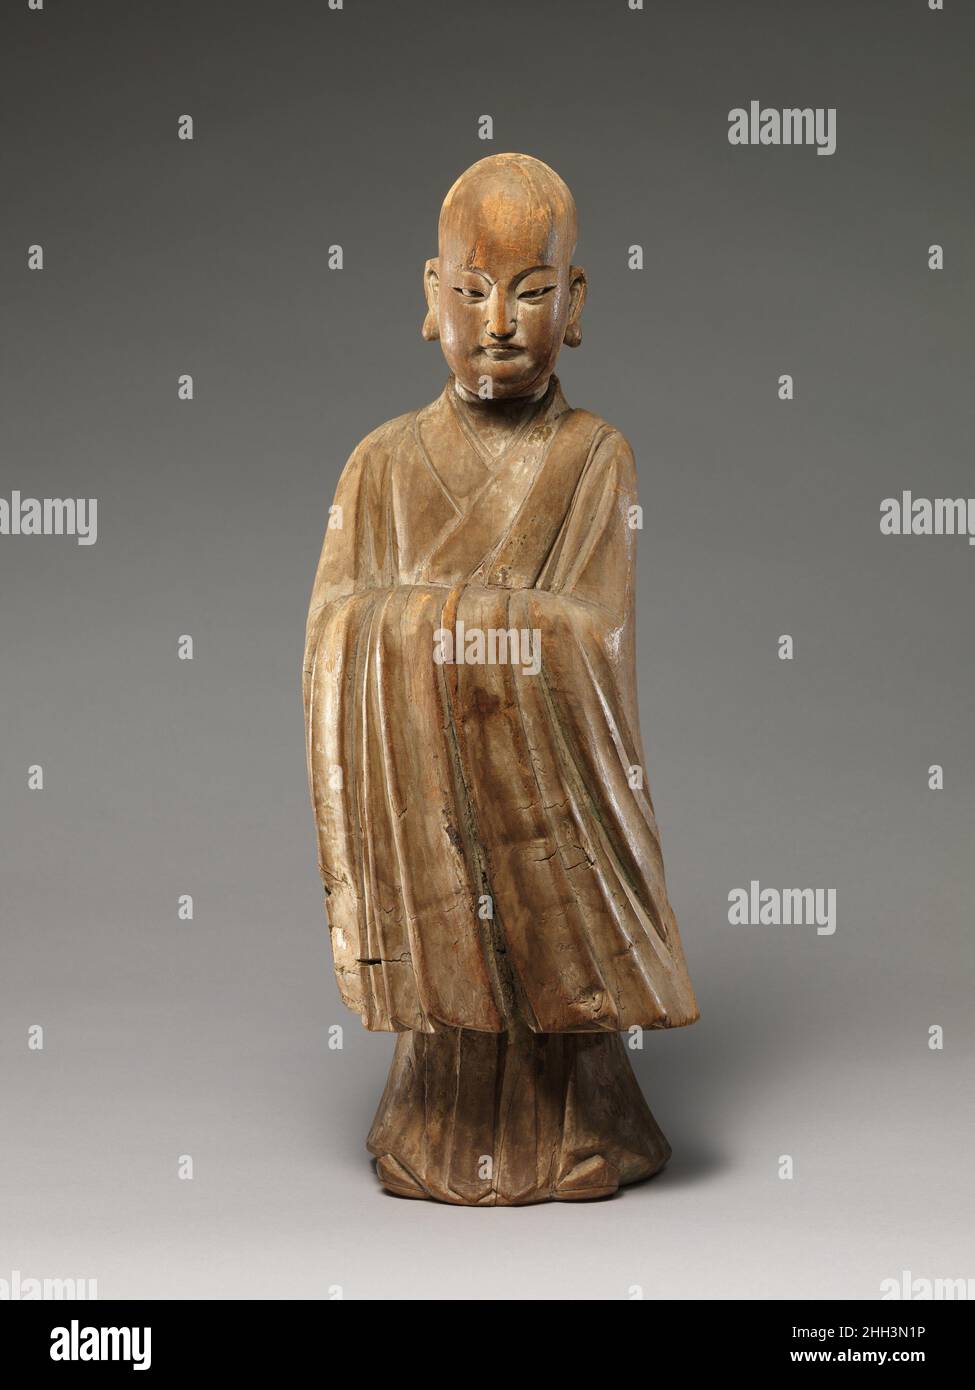 Arhat (Luohan) 16th–17th century China This sculpture epitomizes the merging of religious and secular imagery in later Chinese Buddhist sculpture. With his shaven head and elongated earlobes, the figure resembles a luohan (one of the Indian disciples of the Buddha), but his refined facial features, dignified posture, long-sleeved robe, and pointed shoes—all attributes associated with Confucian scholar-officials—identify him unmistakably as a youthful monk.The sculpture’s tendency toward abstraction and stylization—the contours of the head, body, and robes are conveyed through the buildup of si Stock Photo